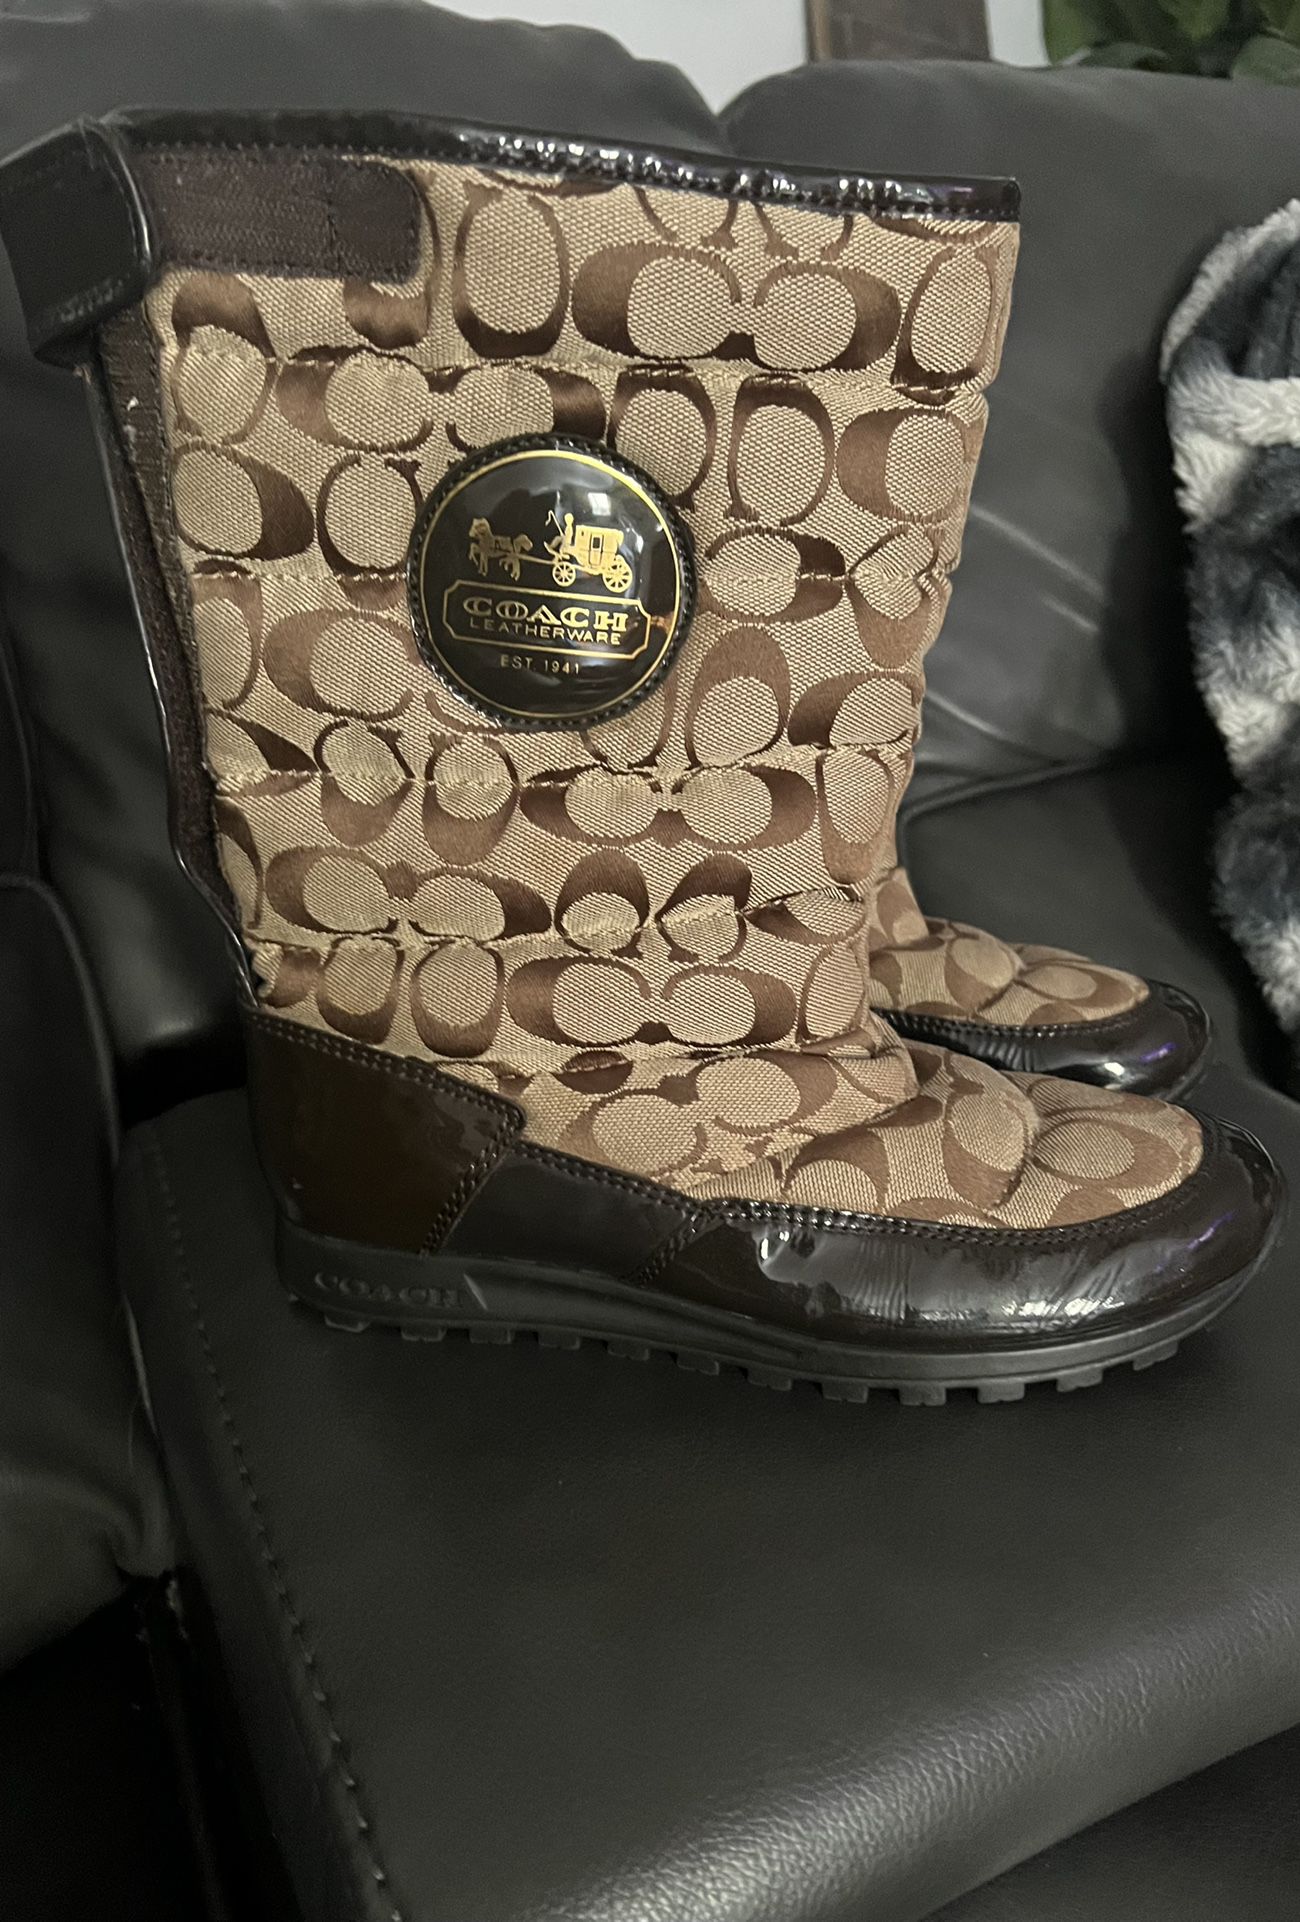 Selling Woman’s Coach Boots 